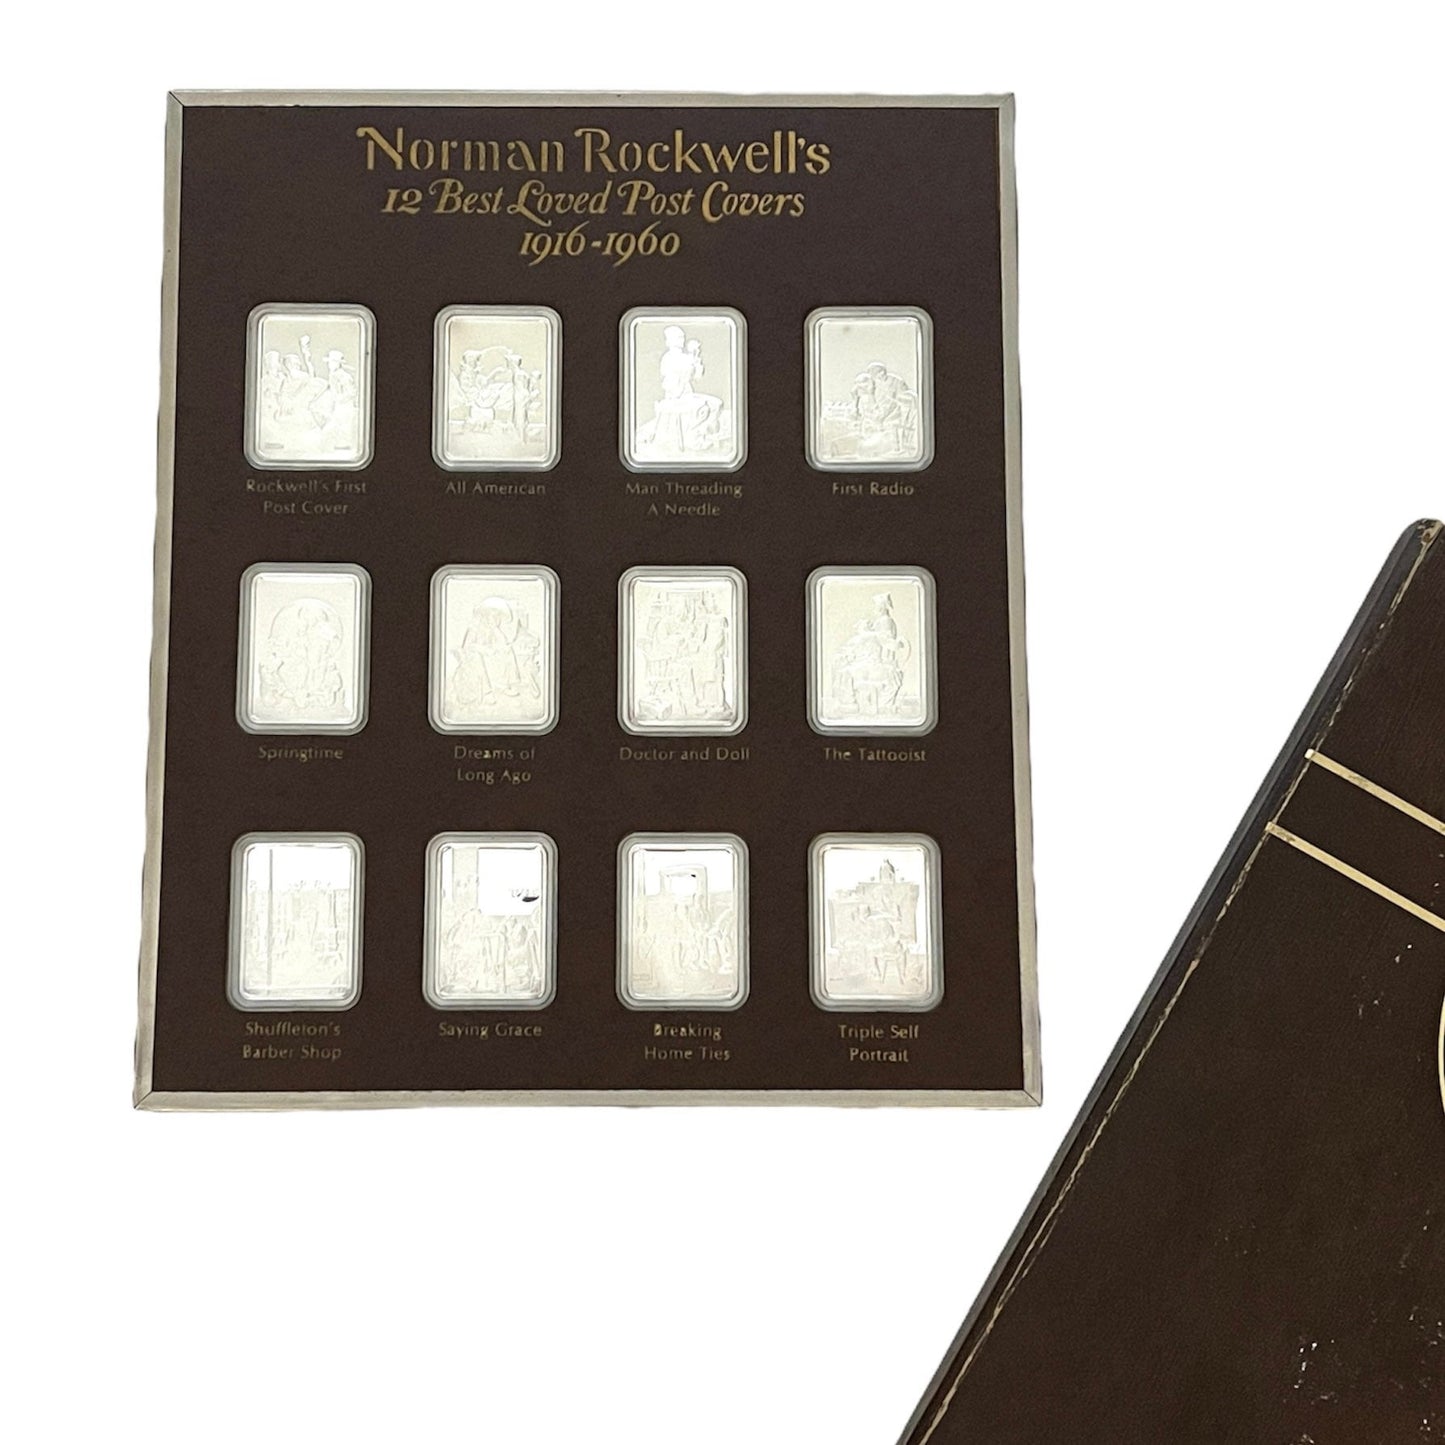 Vintage Fine Silver Ingot Collection Norman Rockwell | Norman Rockwell’s 12 Best Loved Post Covers | 1 OZ Fine Silver Ingot Collection of 12